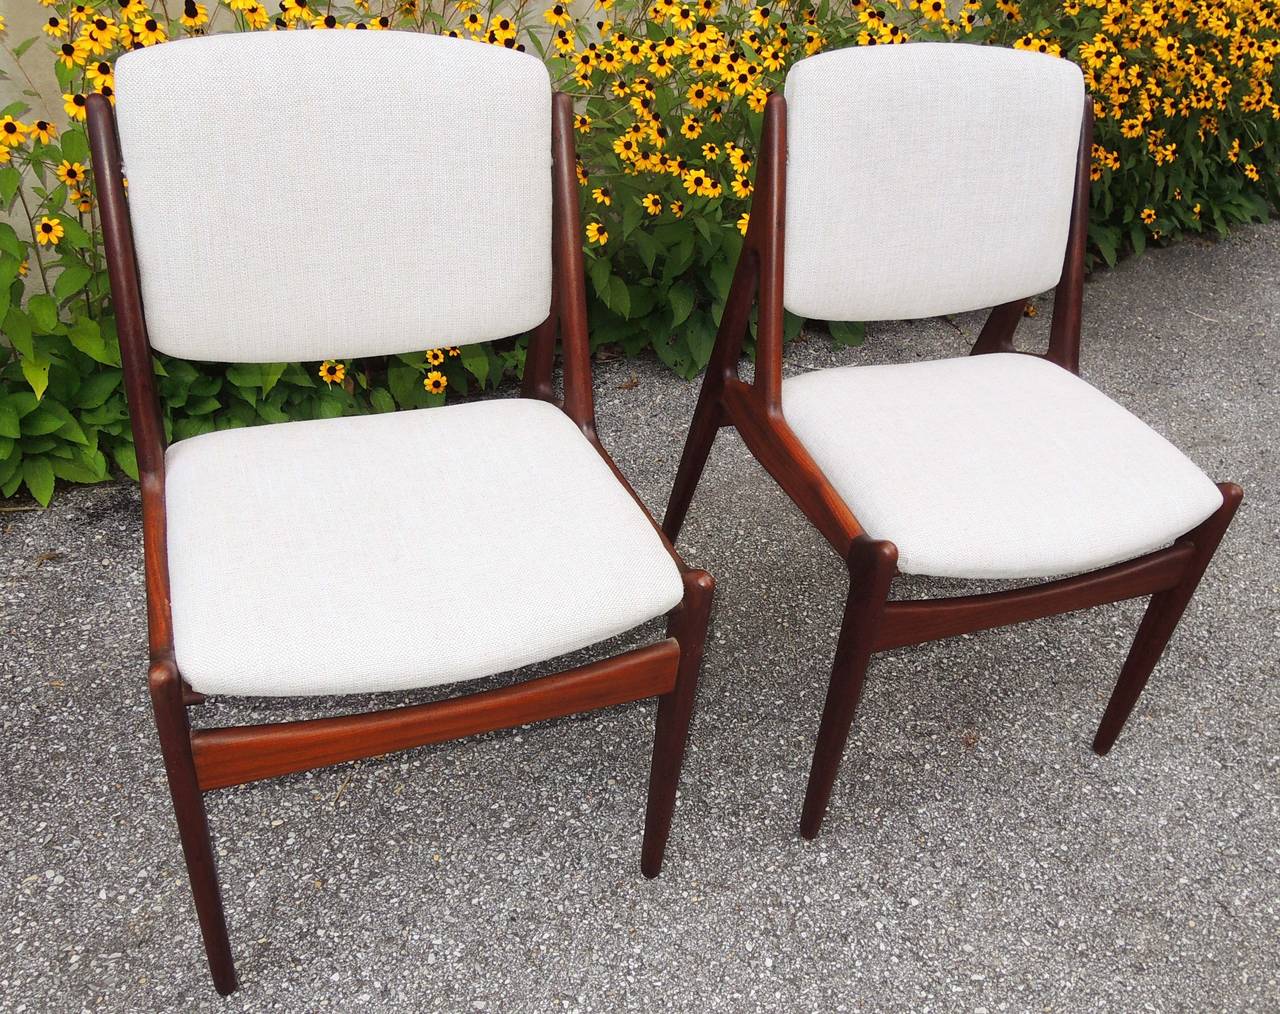 Pair of teak dining chairs by Arne Vodder, c. 1950.
Newly upholstered in linen.